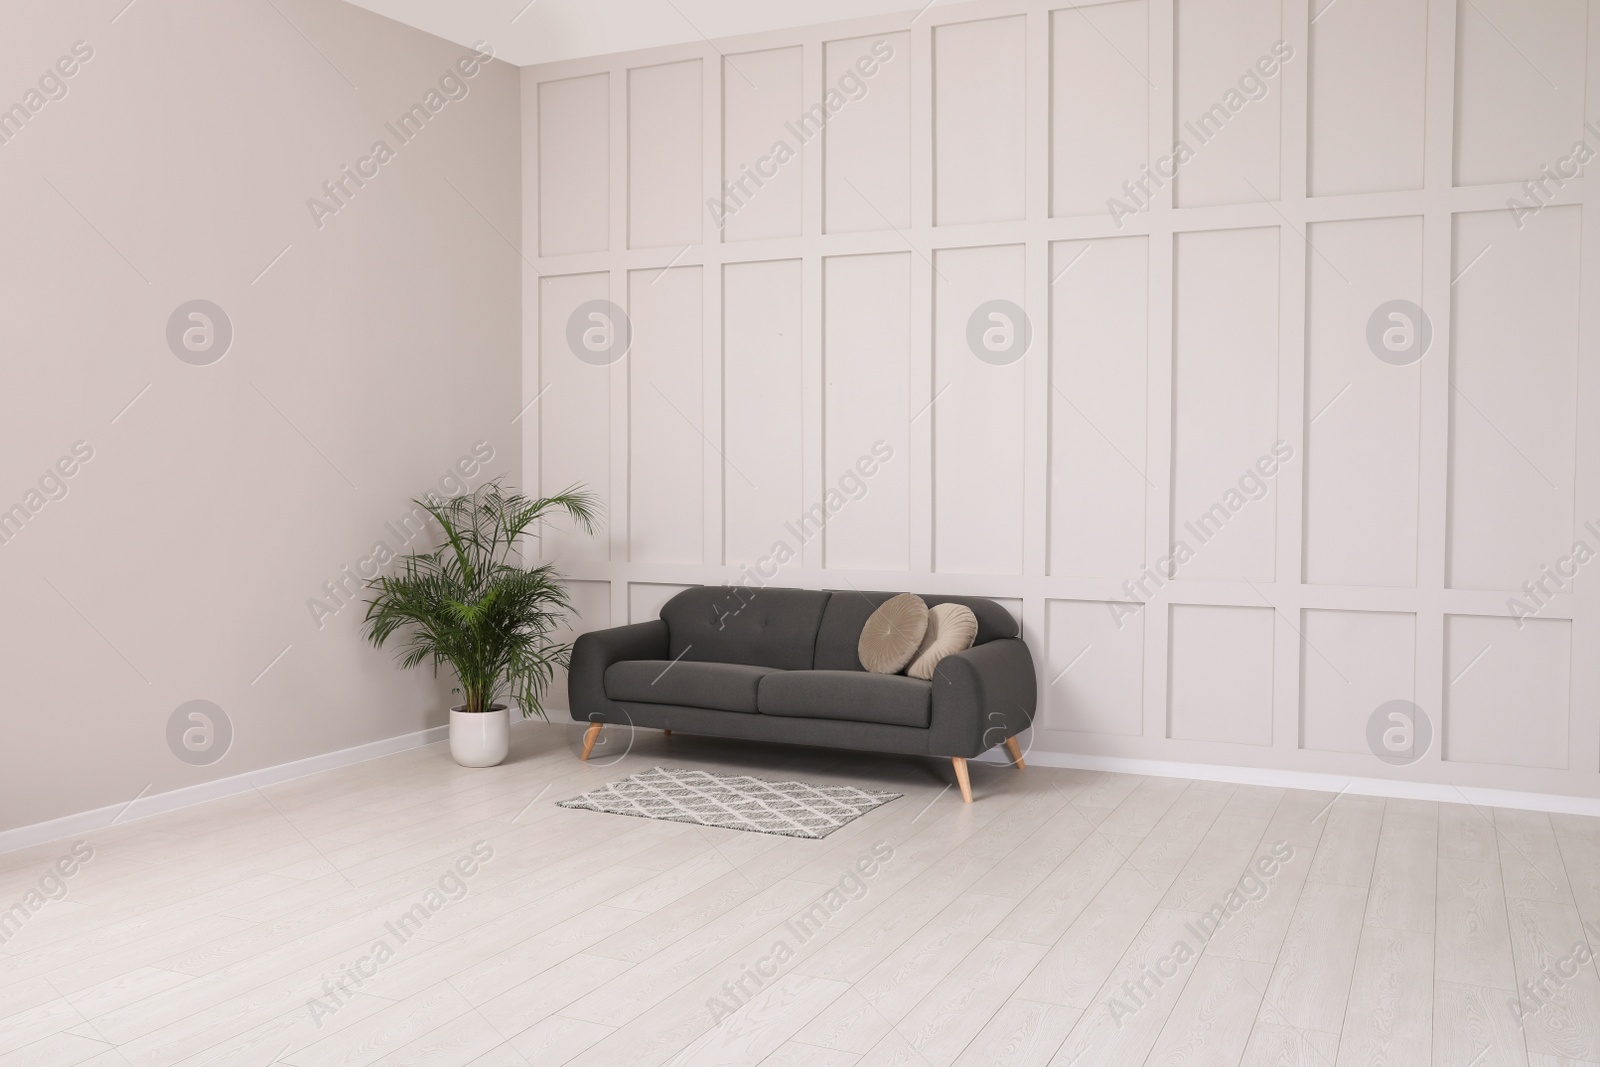 Photo of Grey sofa and green plant near empty molding wall indoors, space for text